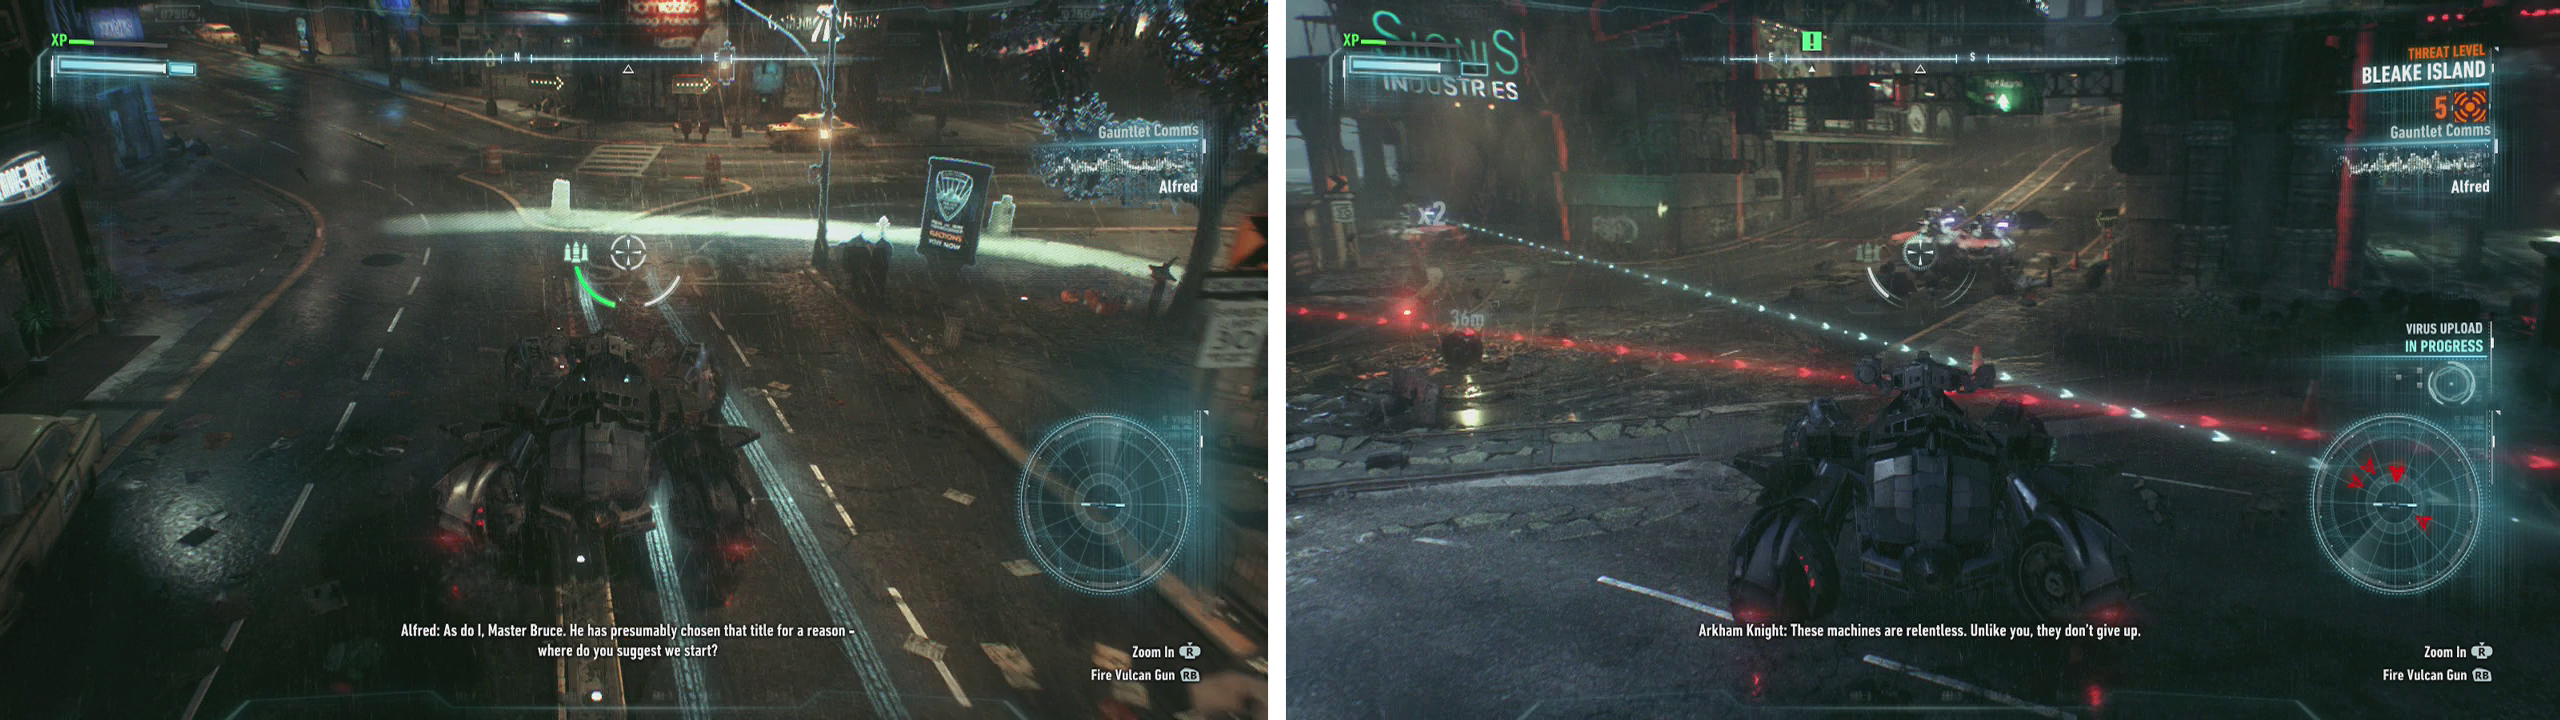 Use the Forensics mode to follow the tire tracks (left). Disarm the bomb and then fend off the Drone Tanks (right).